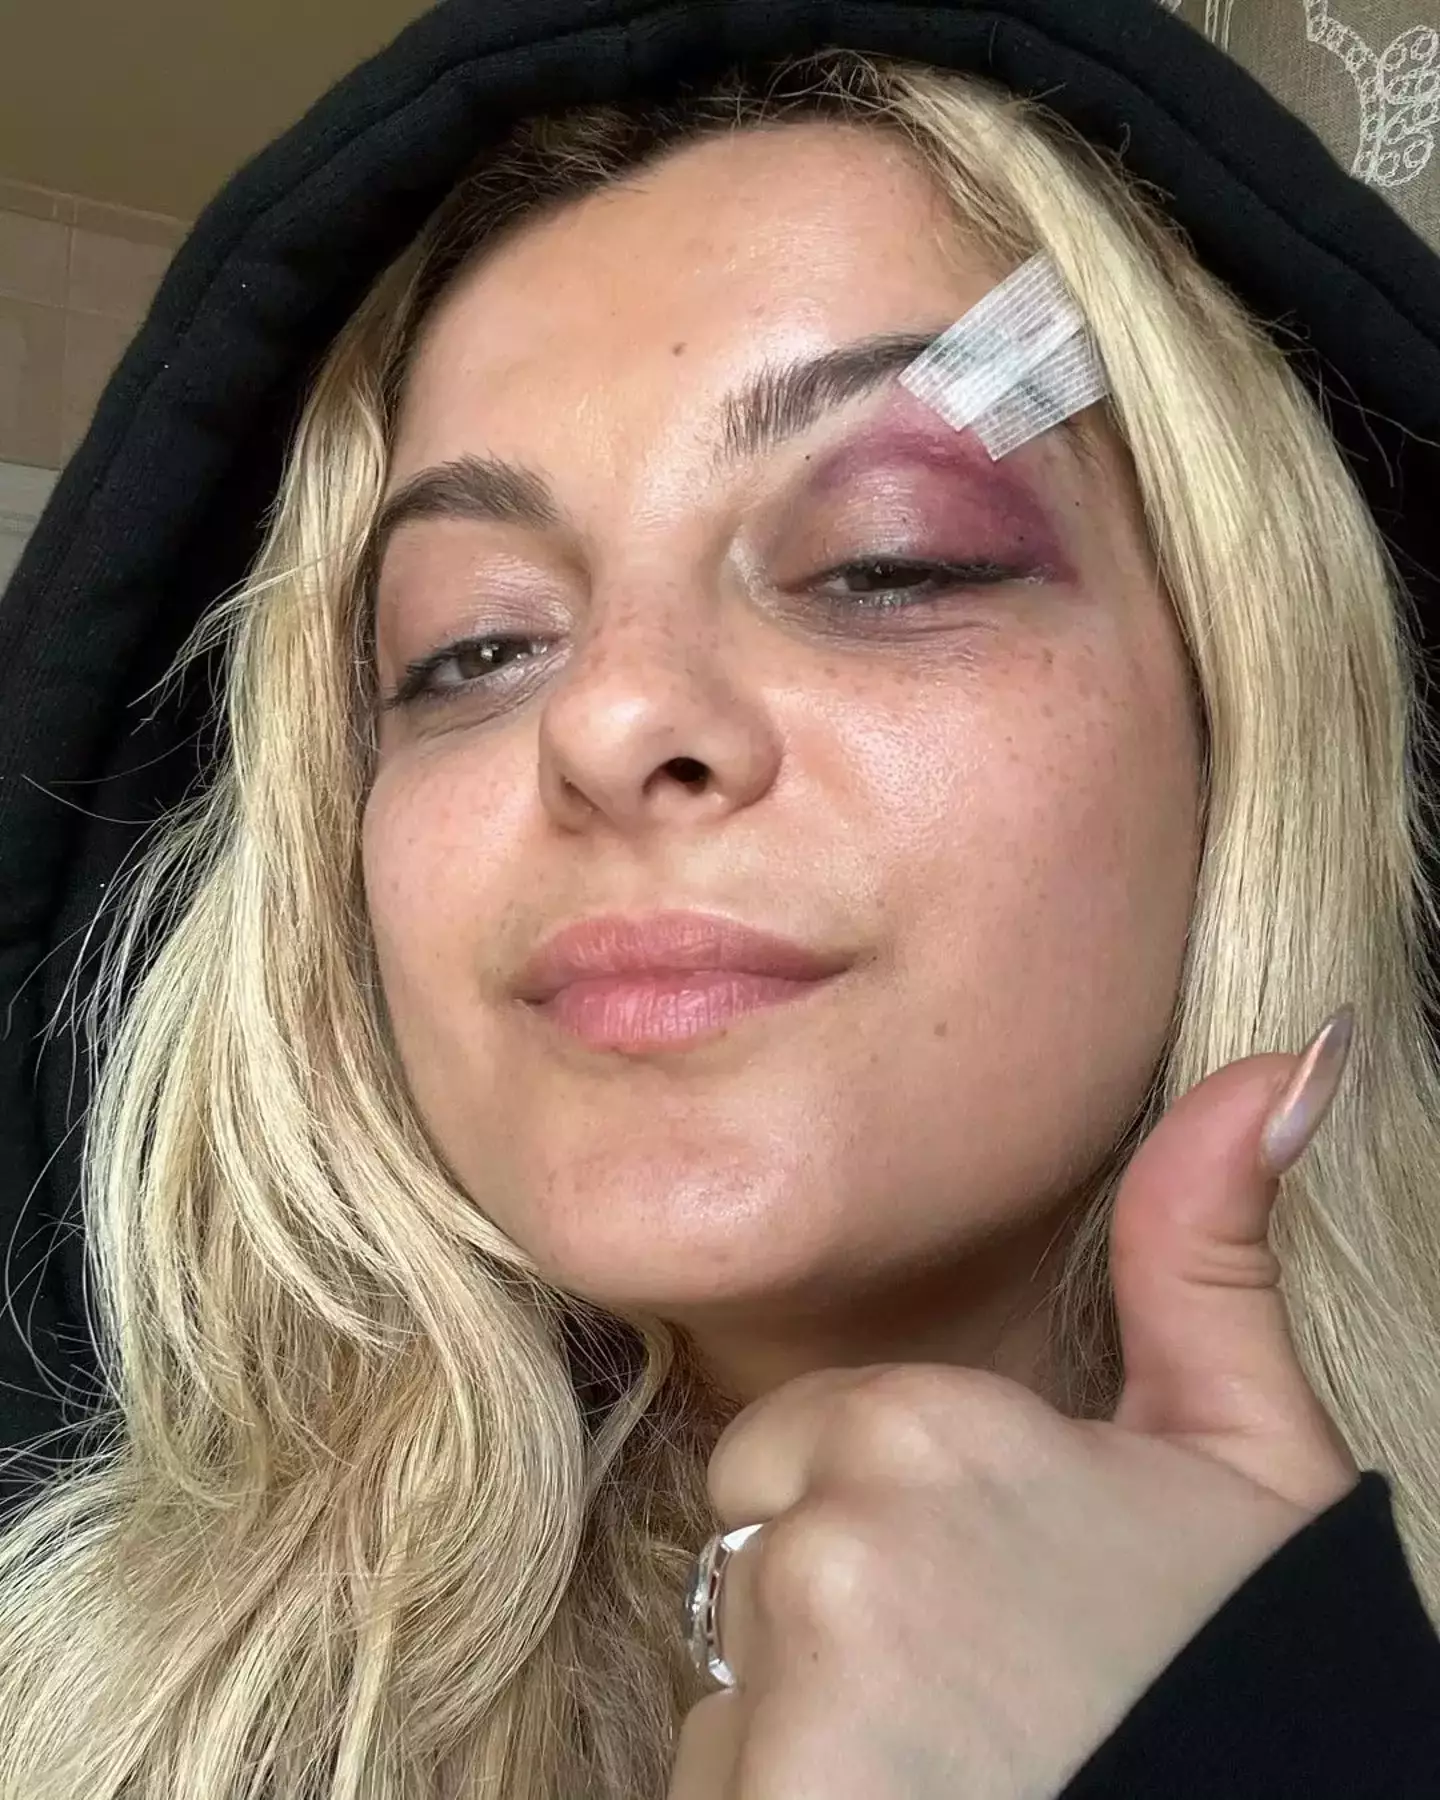 Bebe Rexha shared two pictures of her injuries.